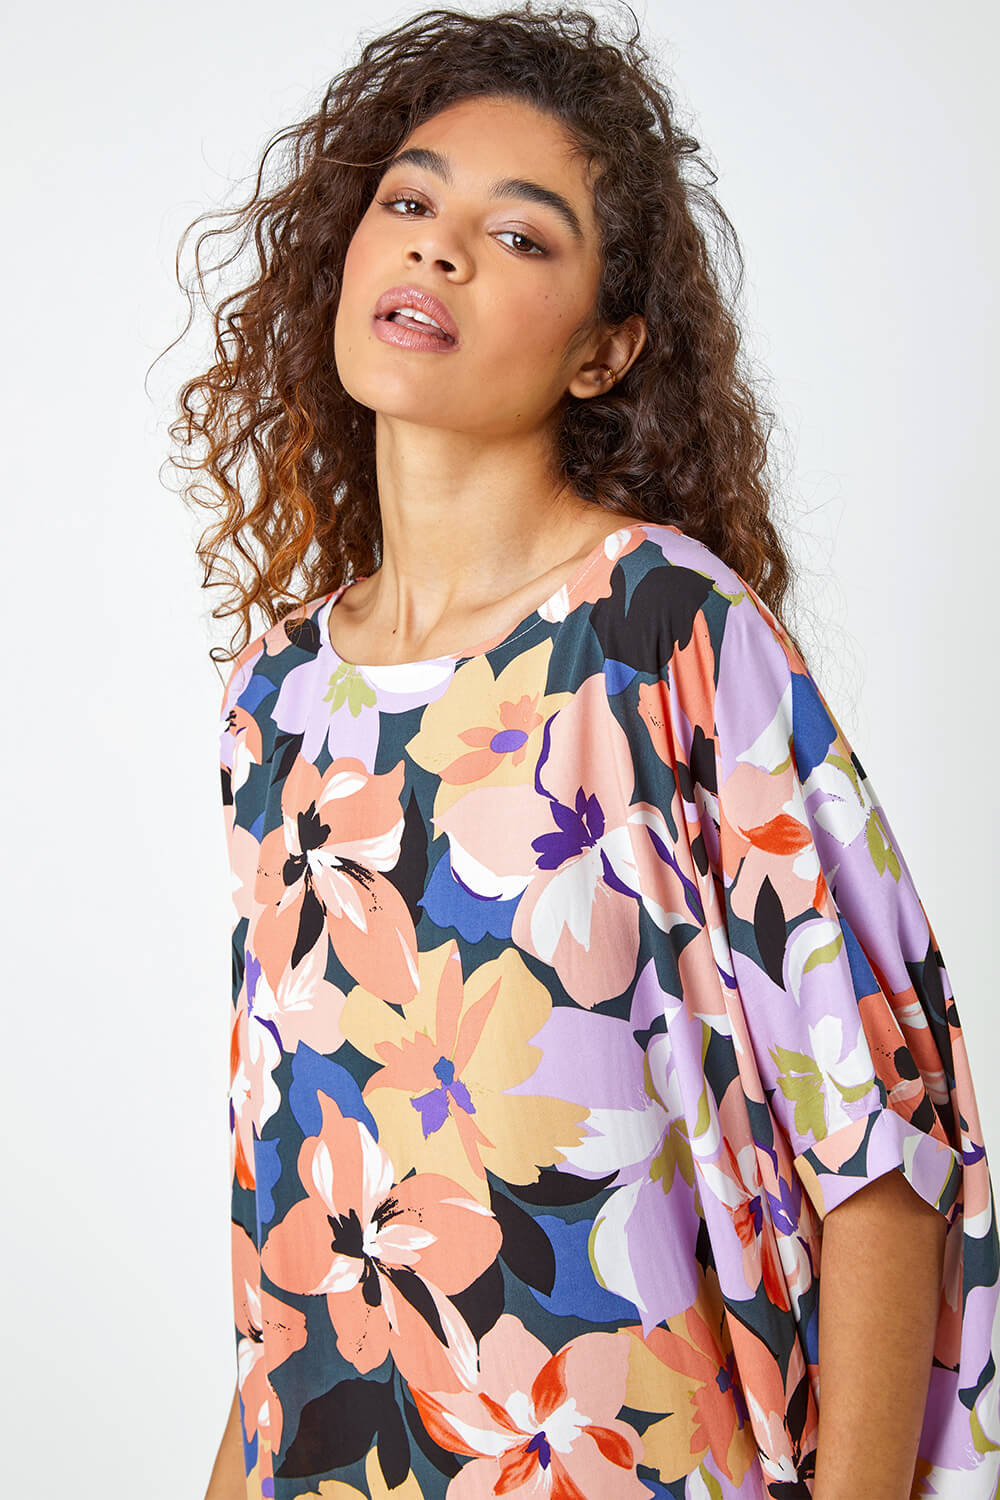 CORAL Floral Print Button Back Top, Image 5 of 5